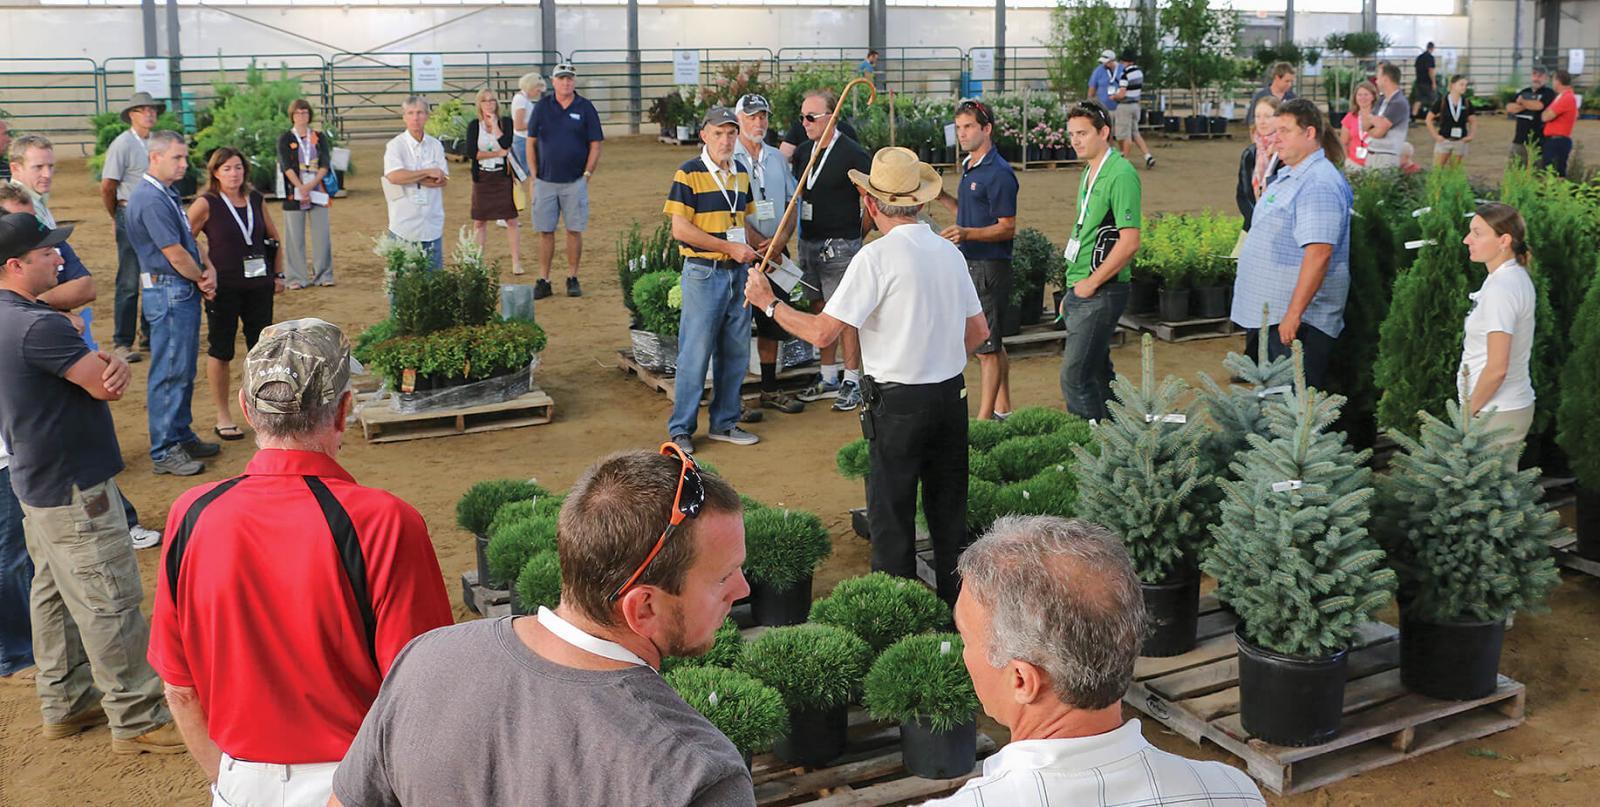 This year’s Industry Auction, held as part of Thrive, offered great plant material at low prices.